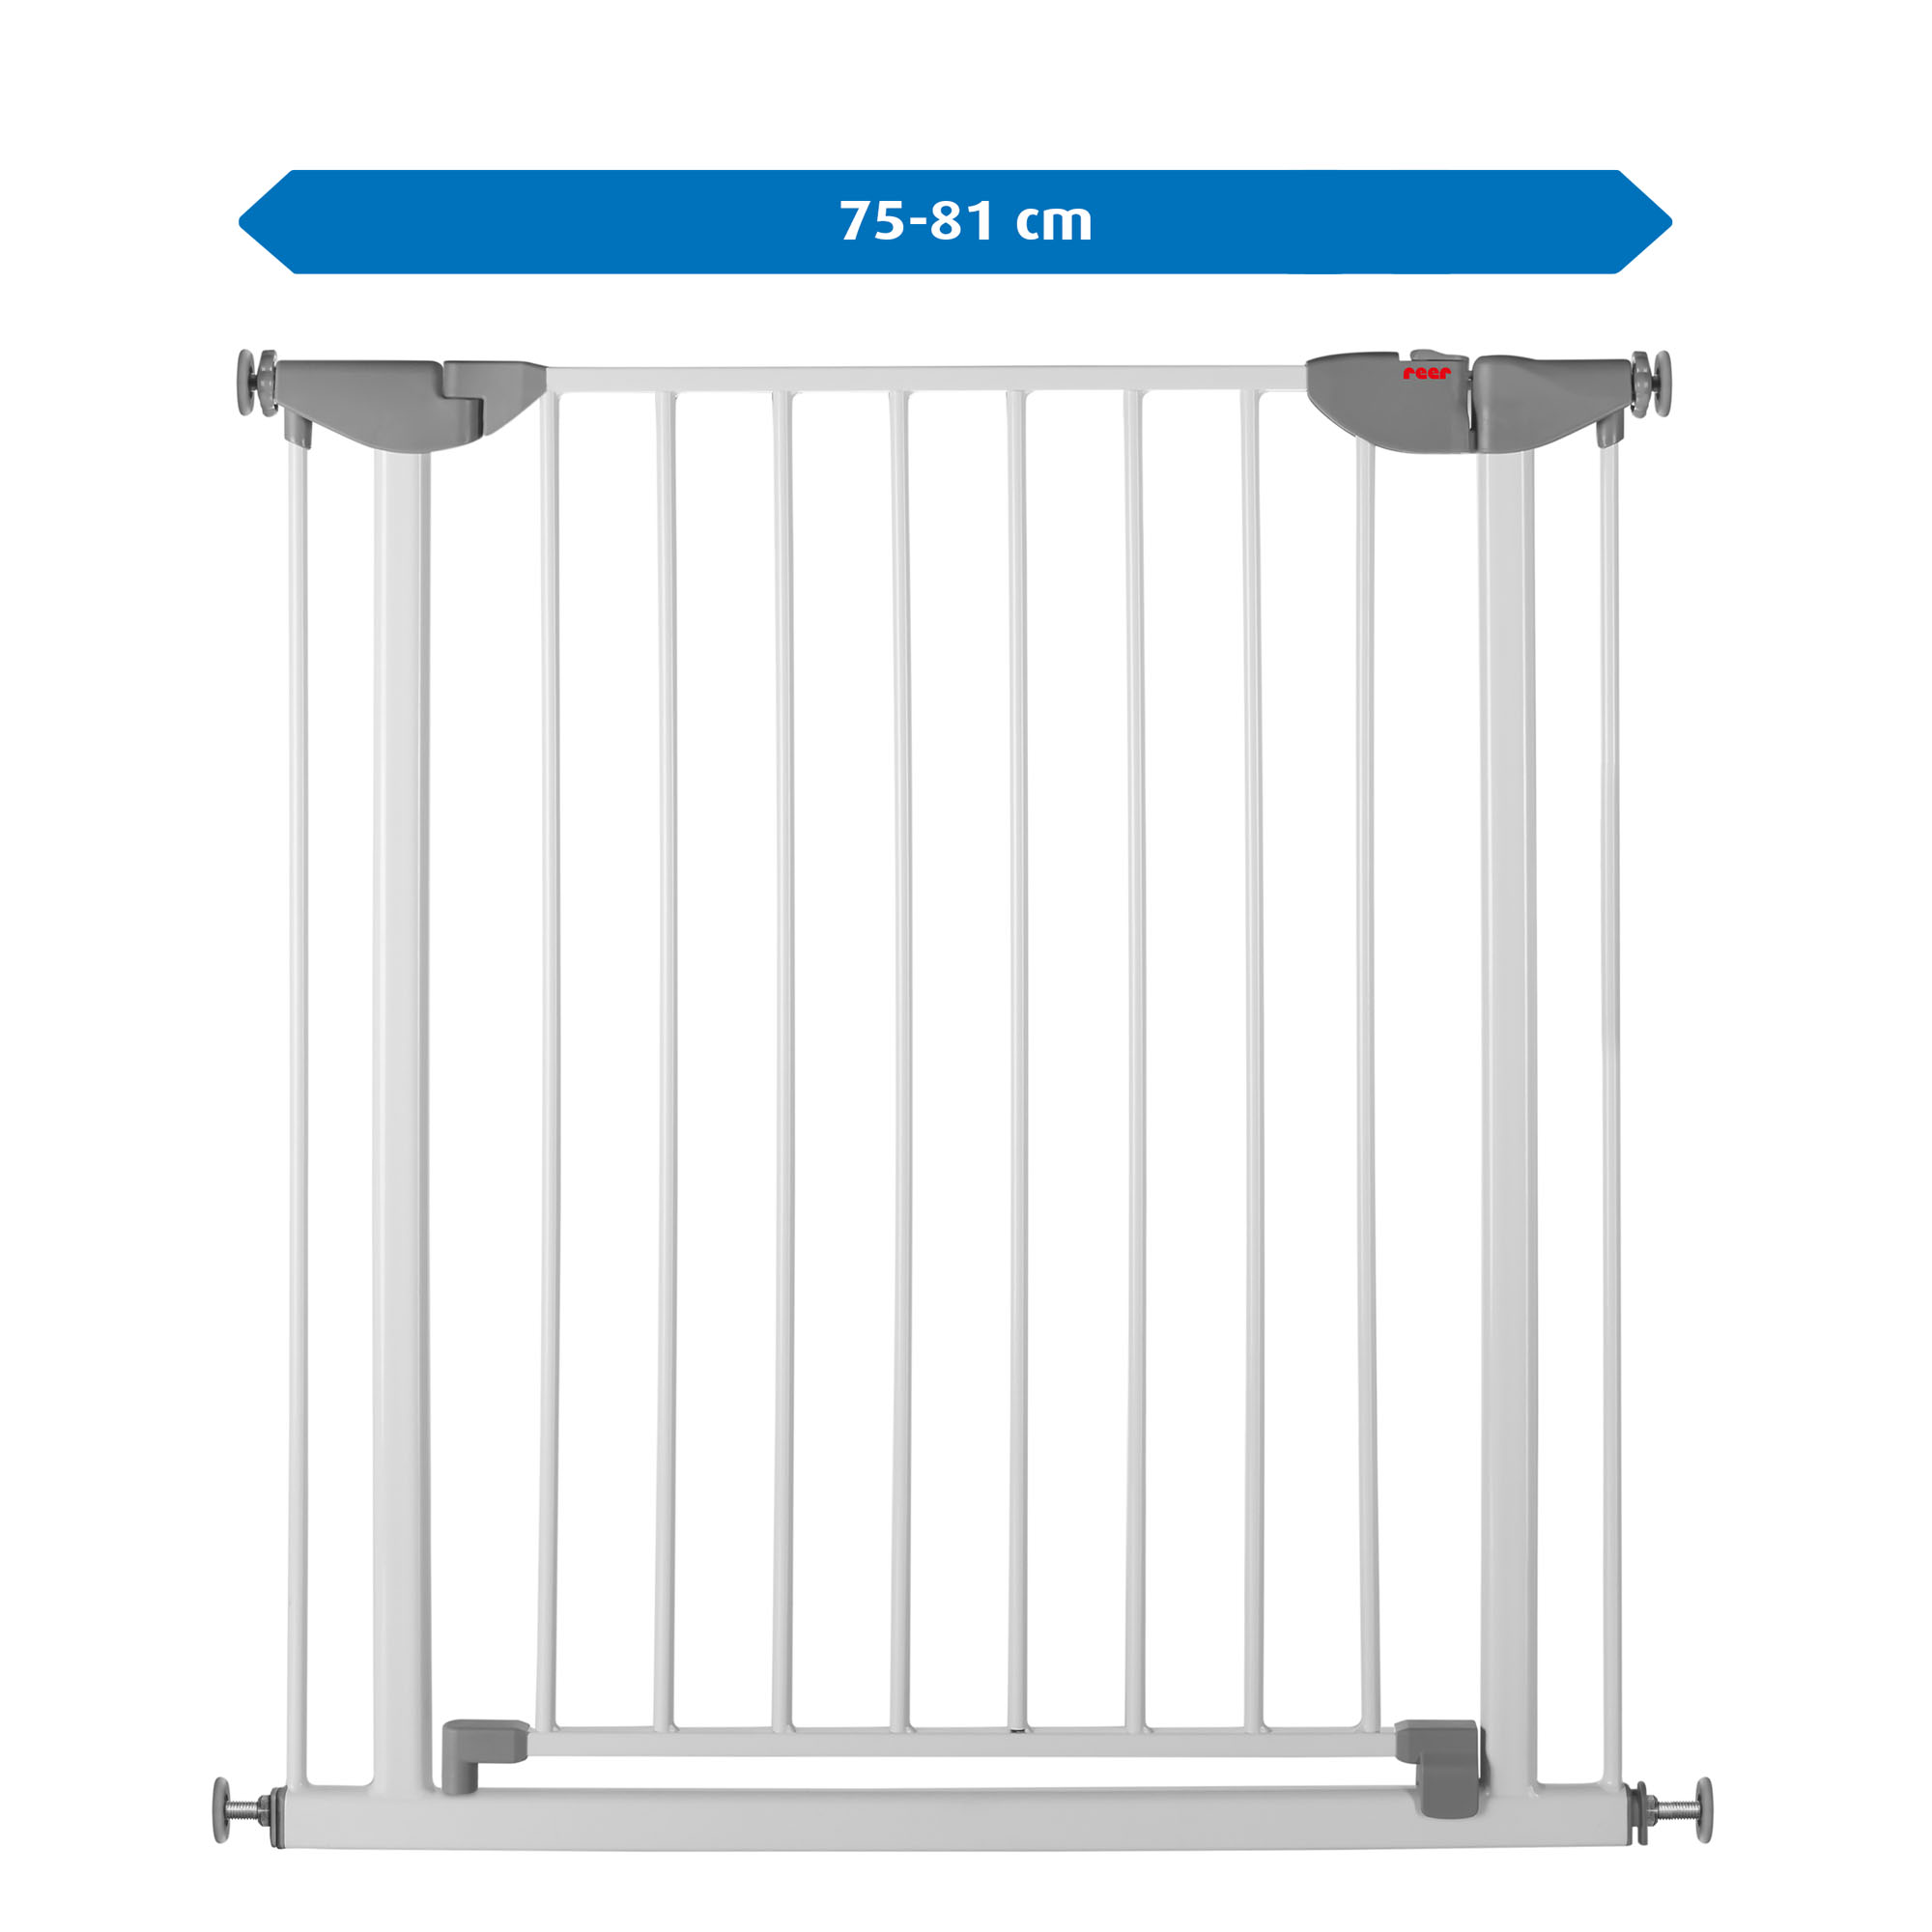 Basic Pressure-mounted gate for gateway widths from 75 - 81 cm